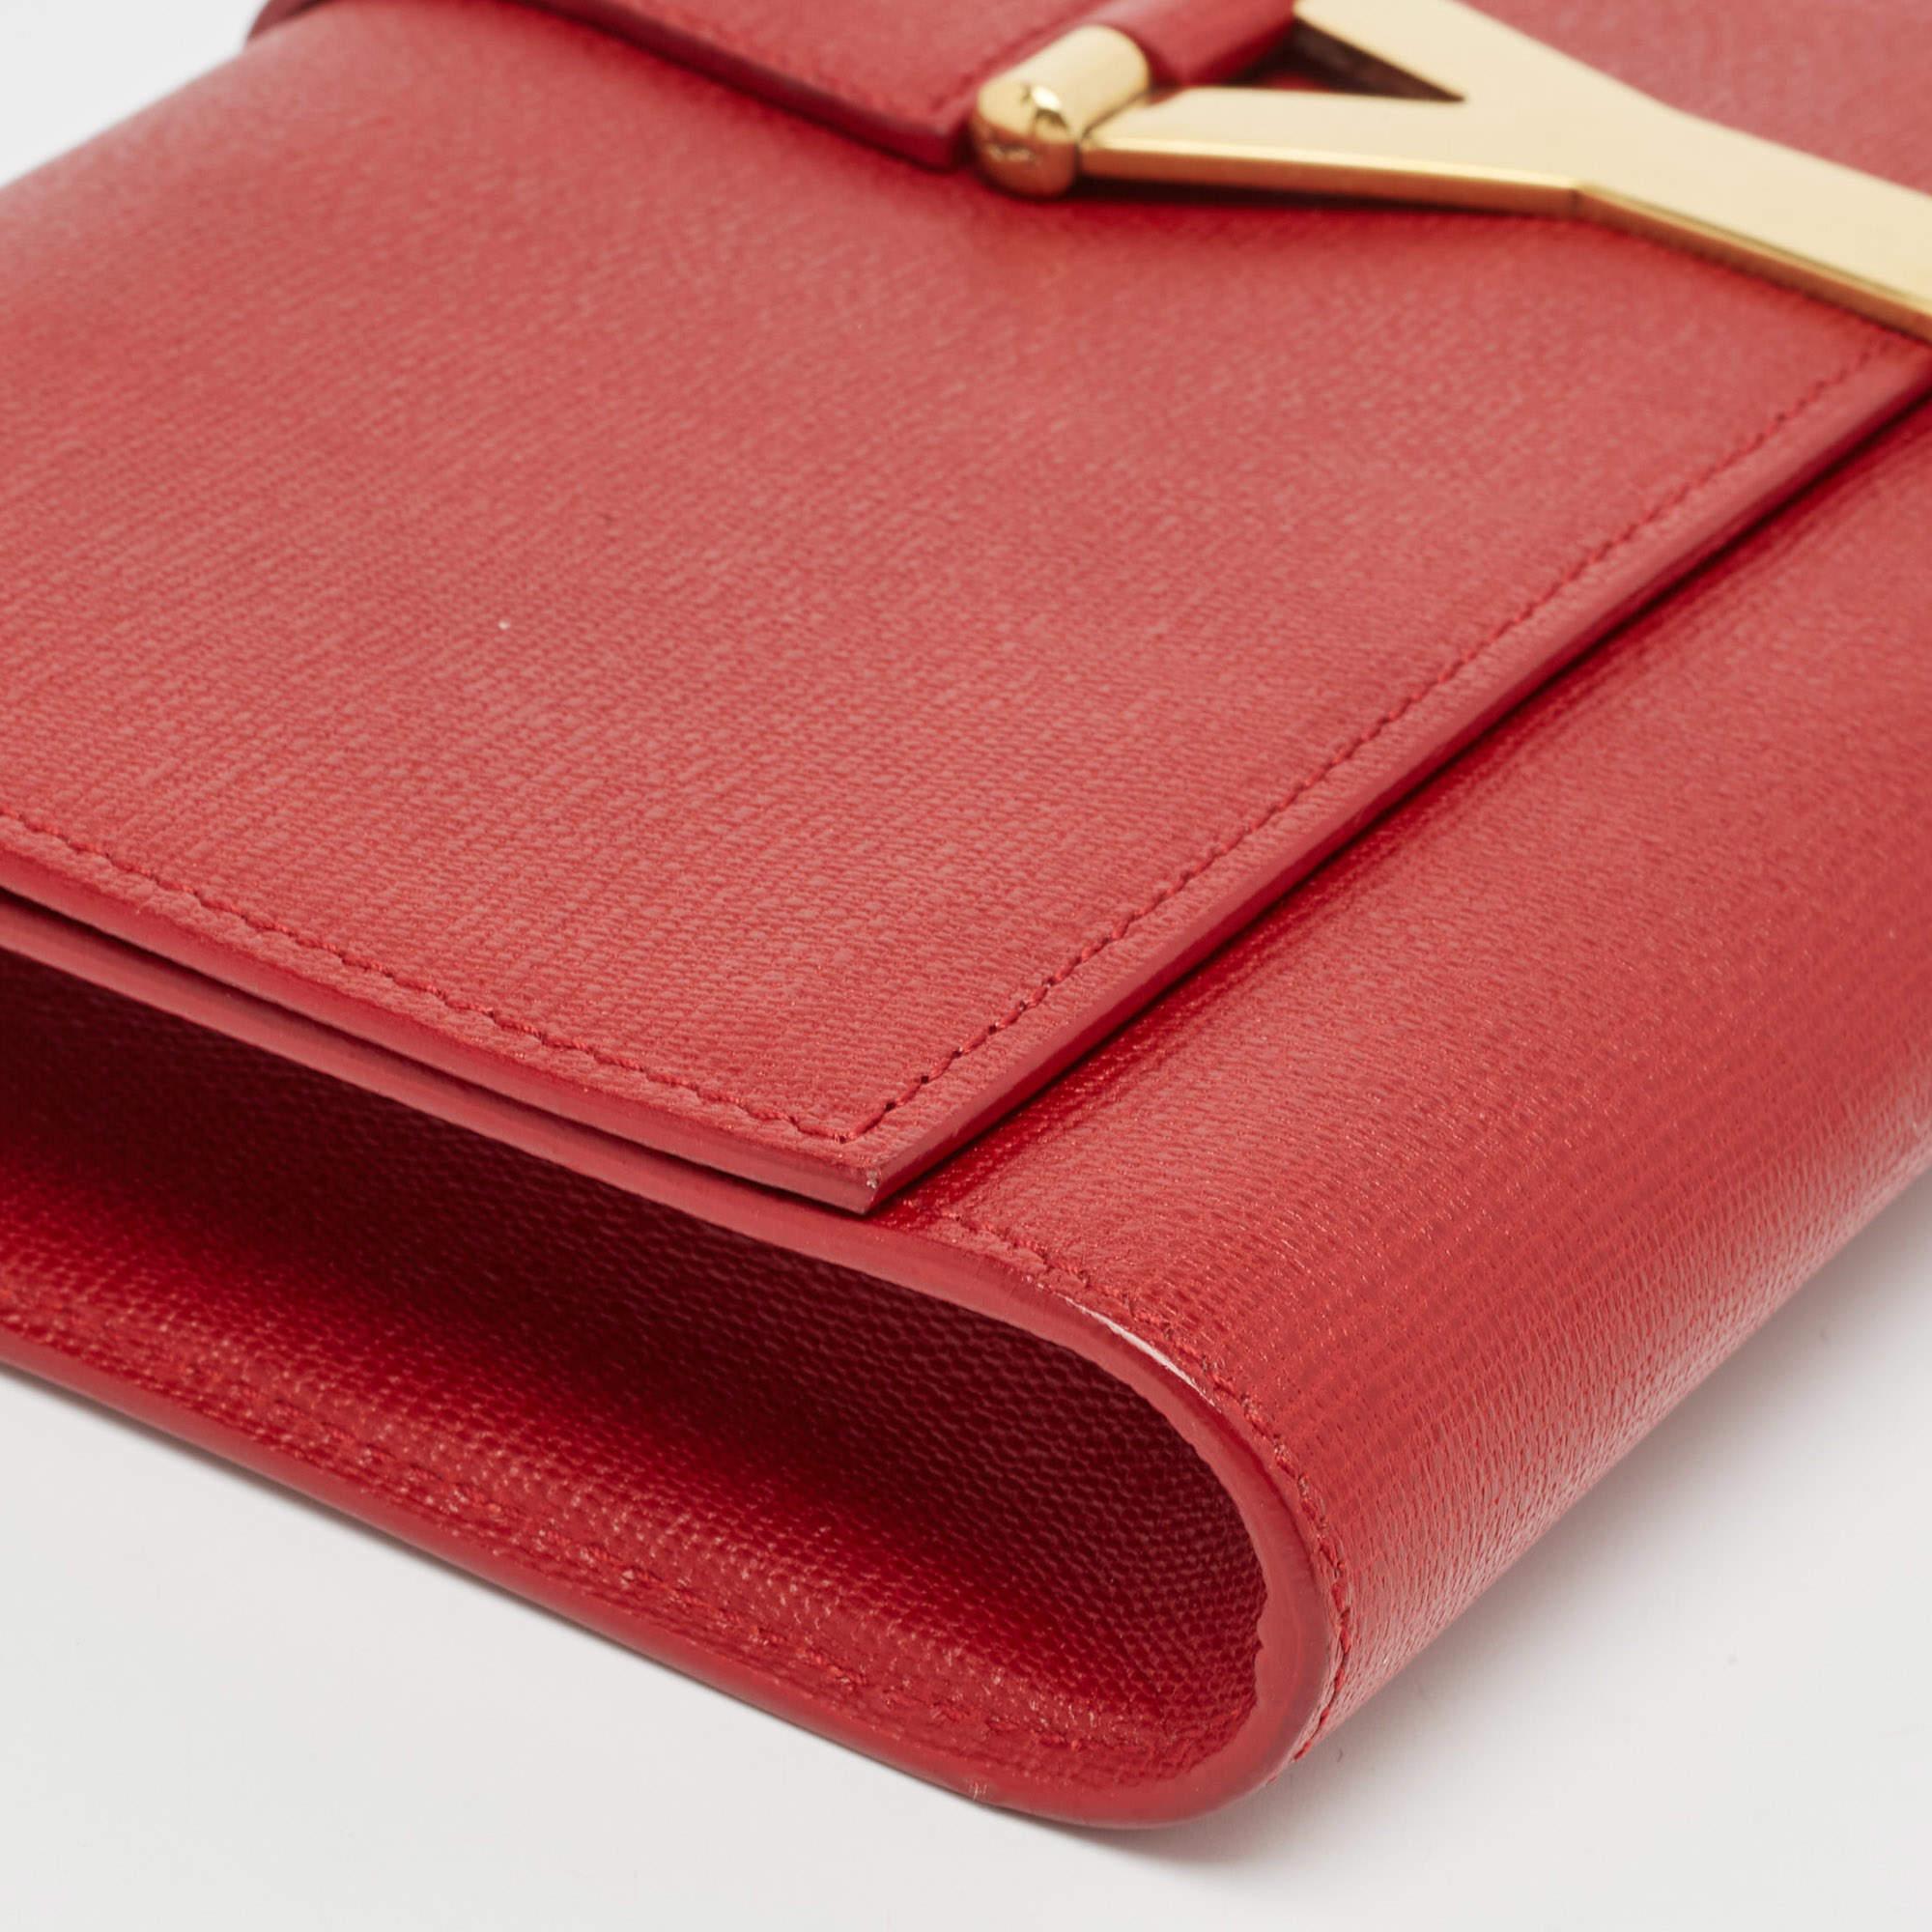 Yves Saint Laurent Red Leather Y-Ligne Clutch 7